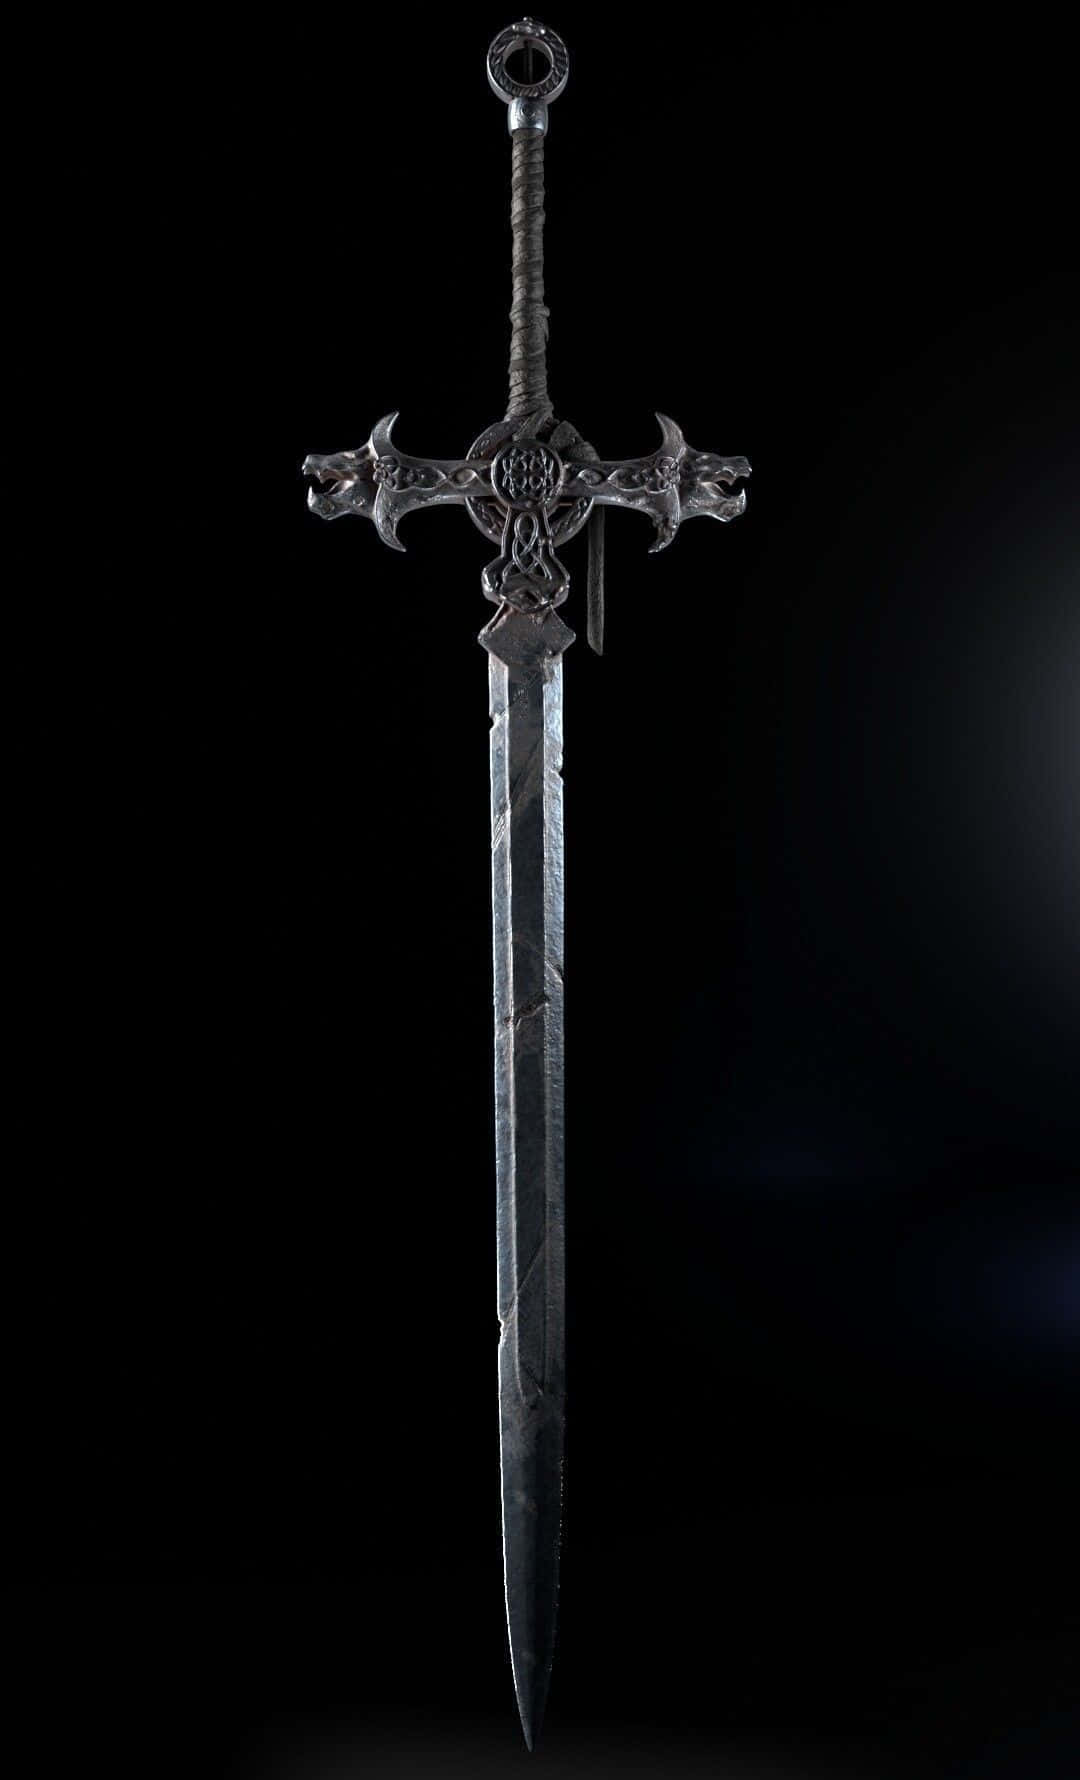 Caption: Mythical Excalibur Sword in Stone Wallpaper